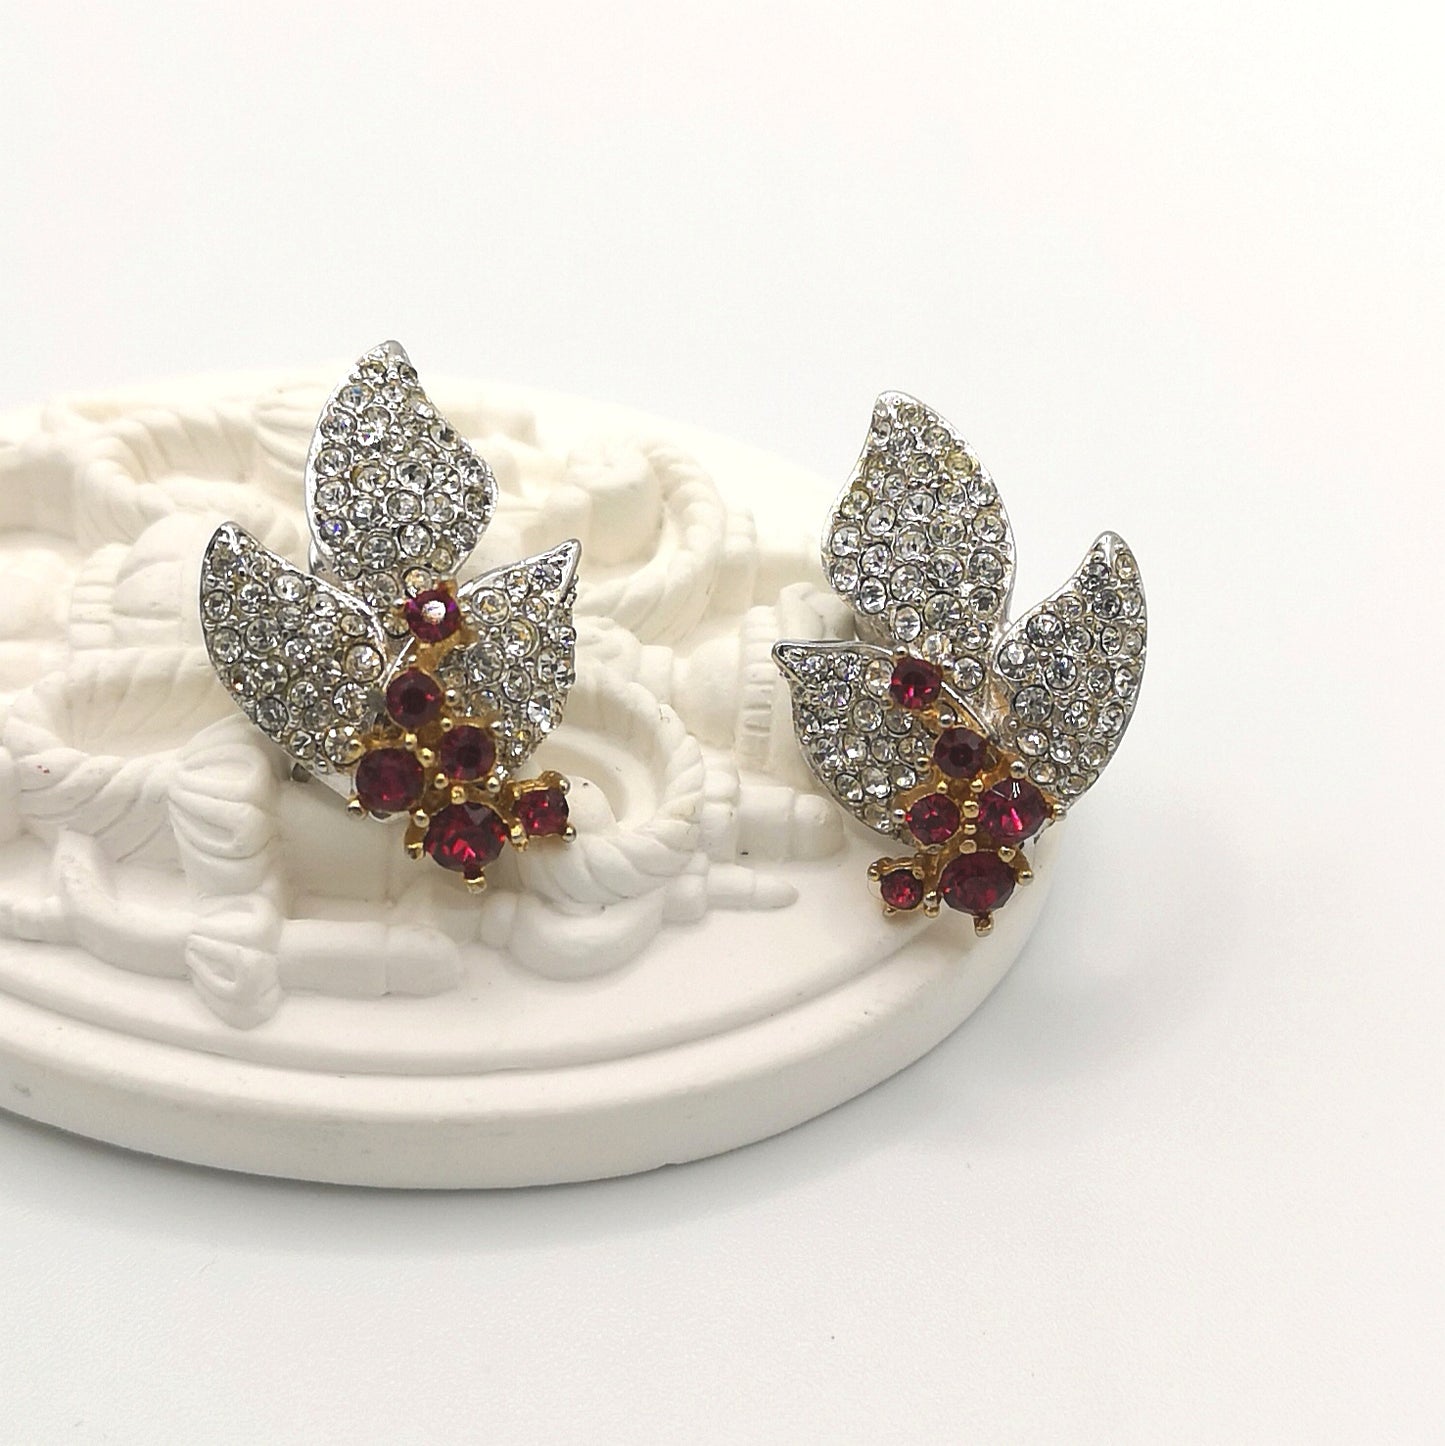 Vintage leaf motif earrings with white and red rhinestones in white metal - 1960 by Boucher